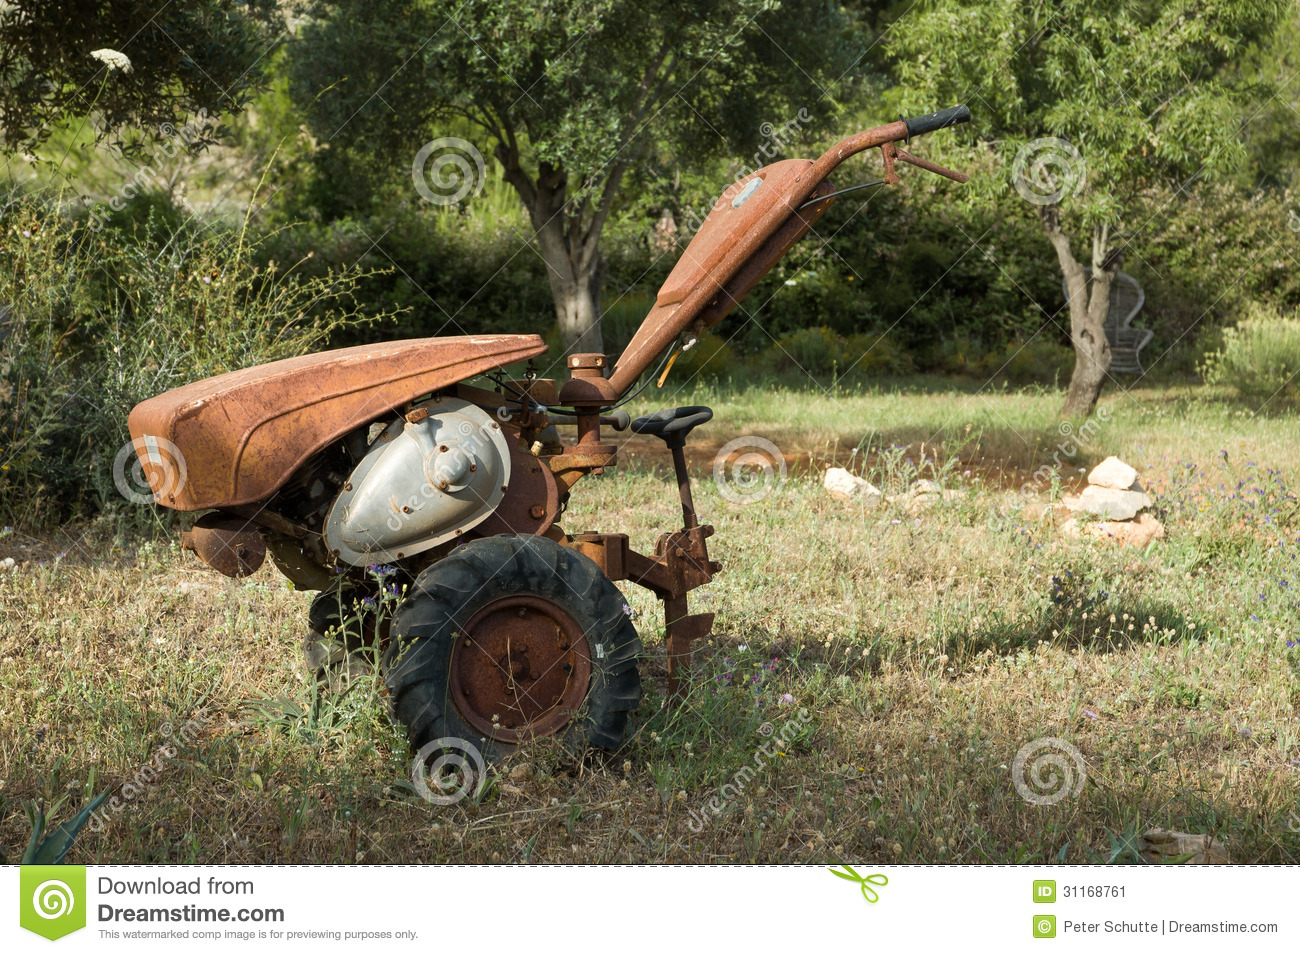 Old Plow Stock Image   Image  31168761